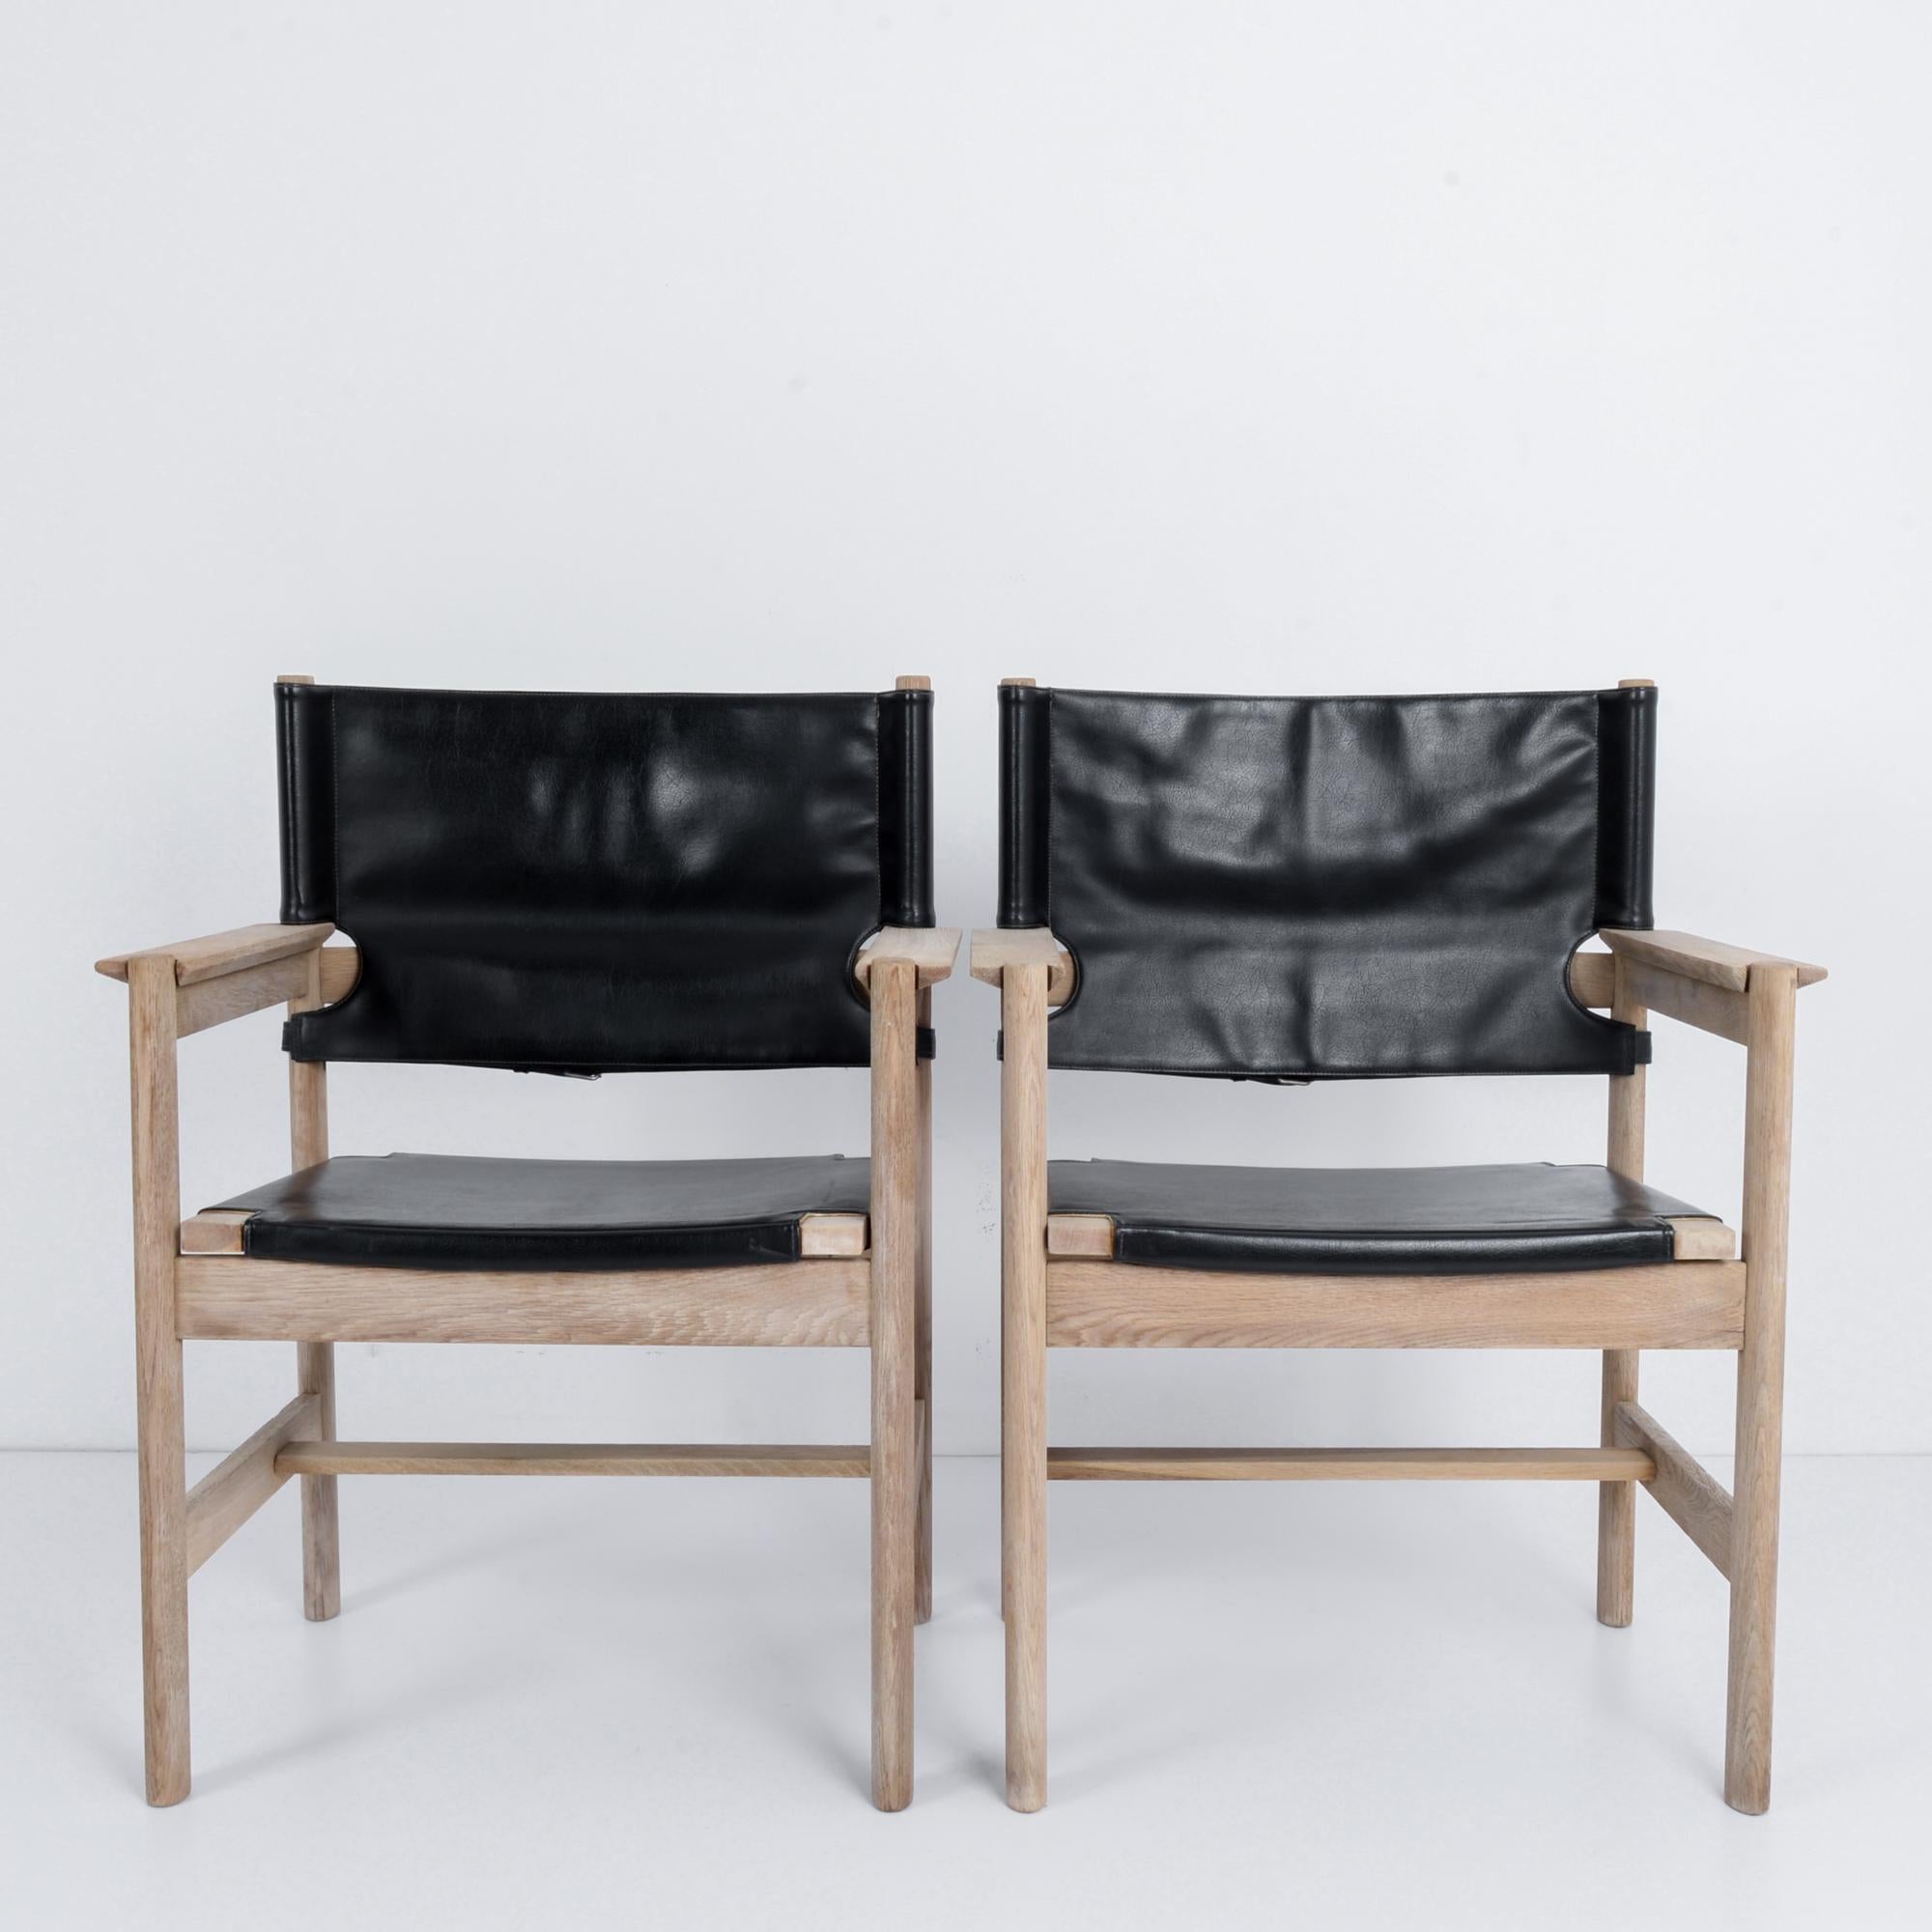 A pair of vintage Russian wooden armchairs with leather seats and backs, produced circa 1960. Classic example of soviet midcentury design principles, the striking black and white contrast these beautiful seats are ready for relaxation at the dacha